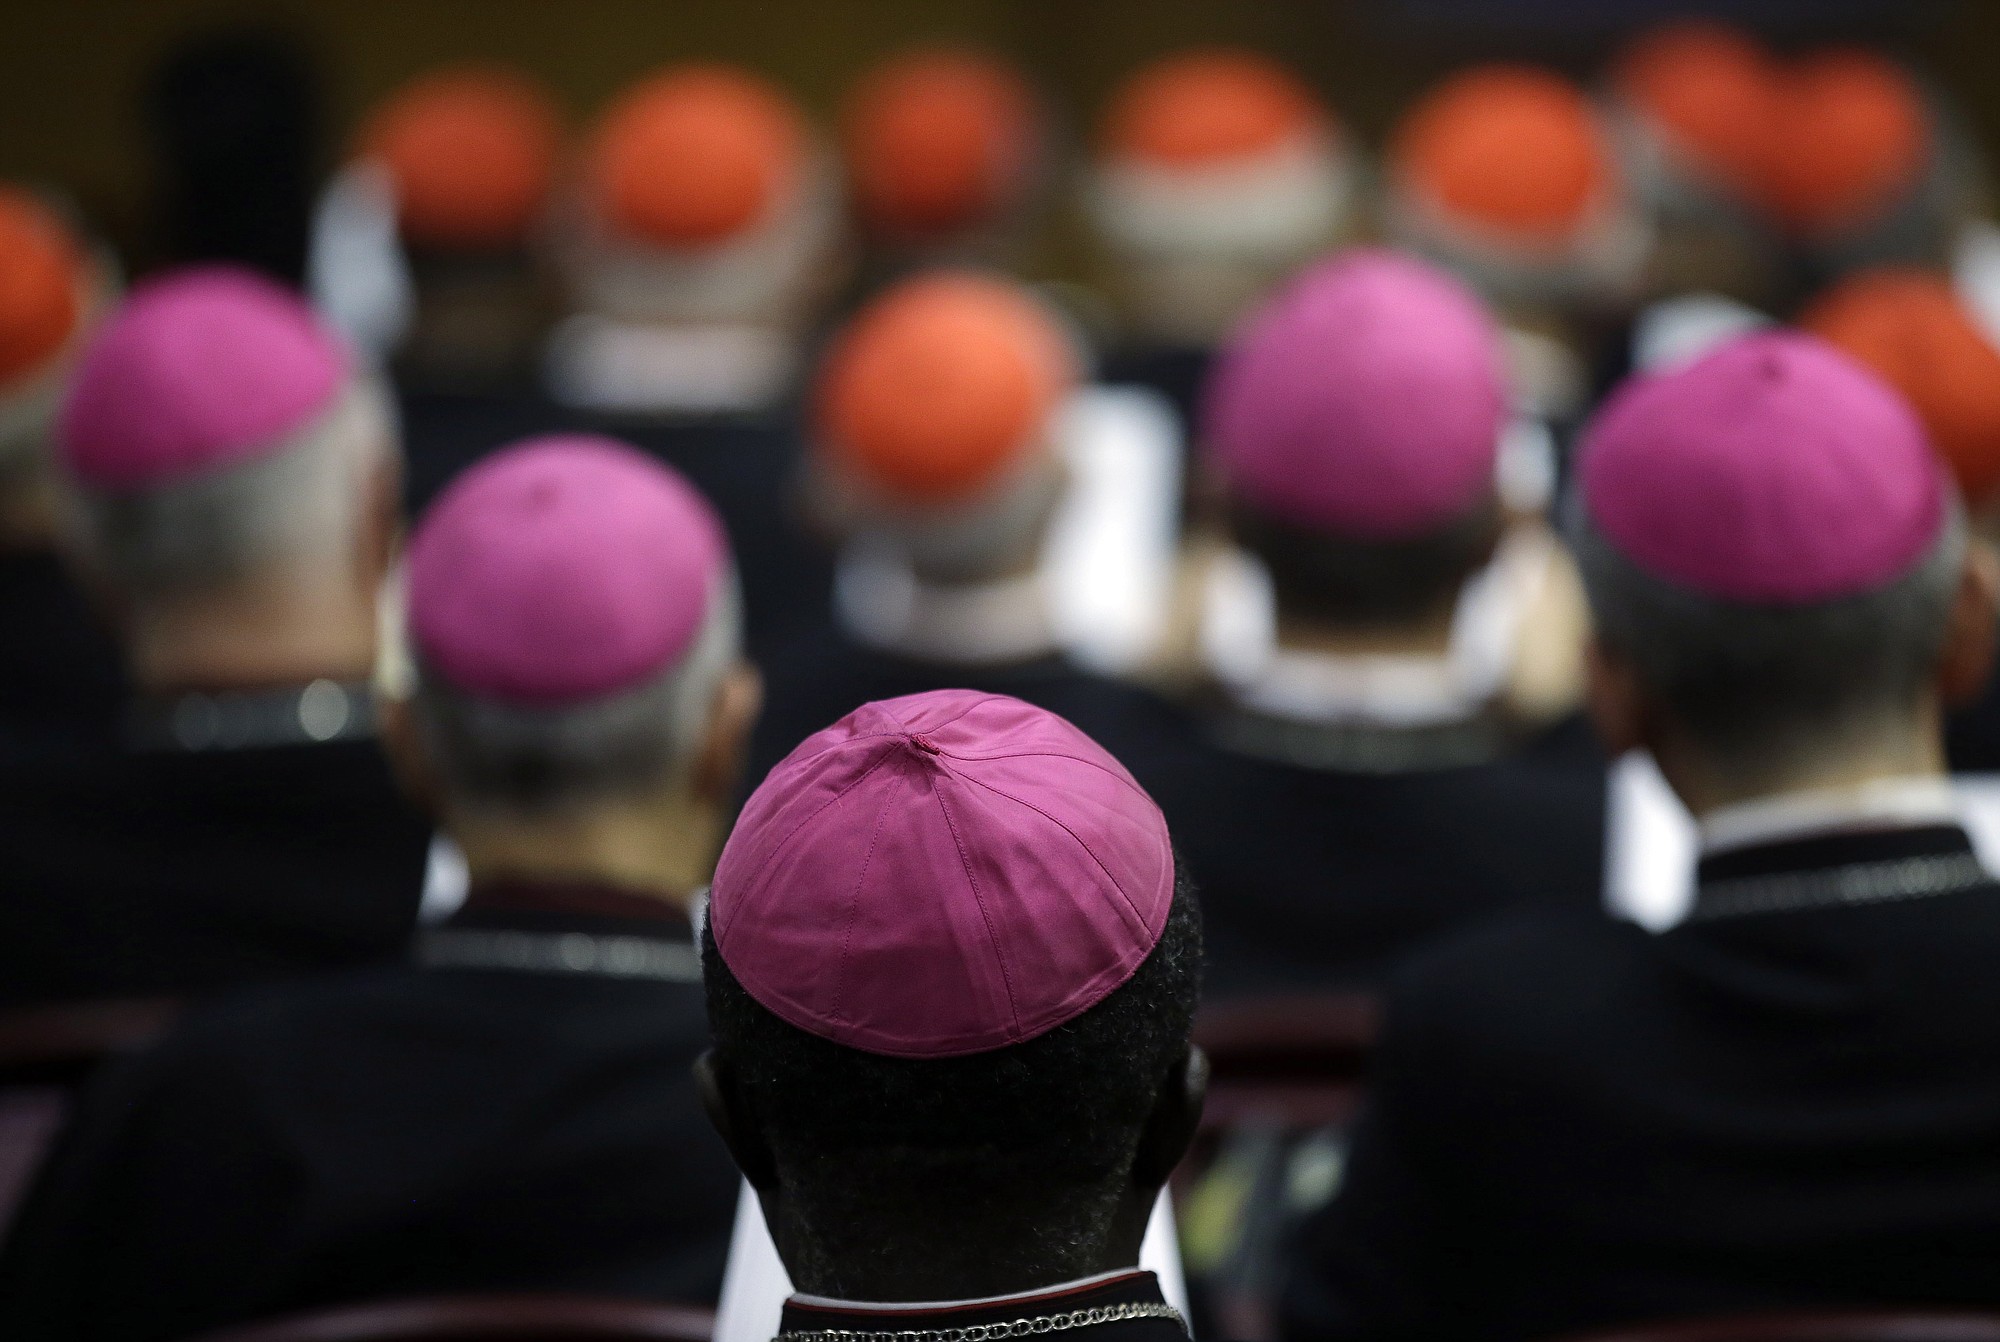 Bishops and Cardinals attend a Monday morning session of a two-week synod on family issues at the Vatican. Catholic bishops scrapped their landmark welcome to gays Saturday, showing deep divisions at the end of a two-week meeting sought by Pope Francis to chart a more merciful approach to ministering to Catholic families.